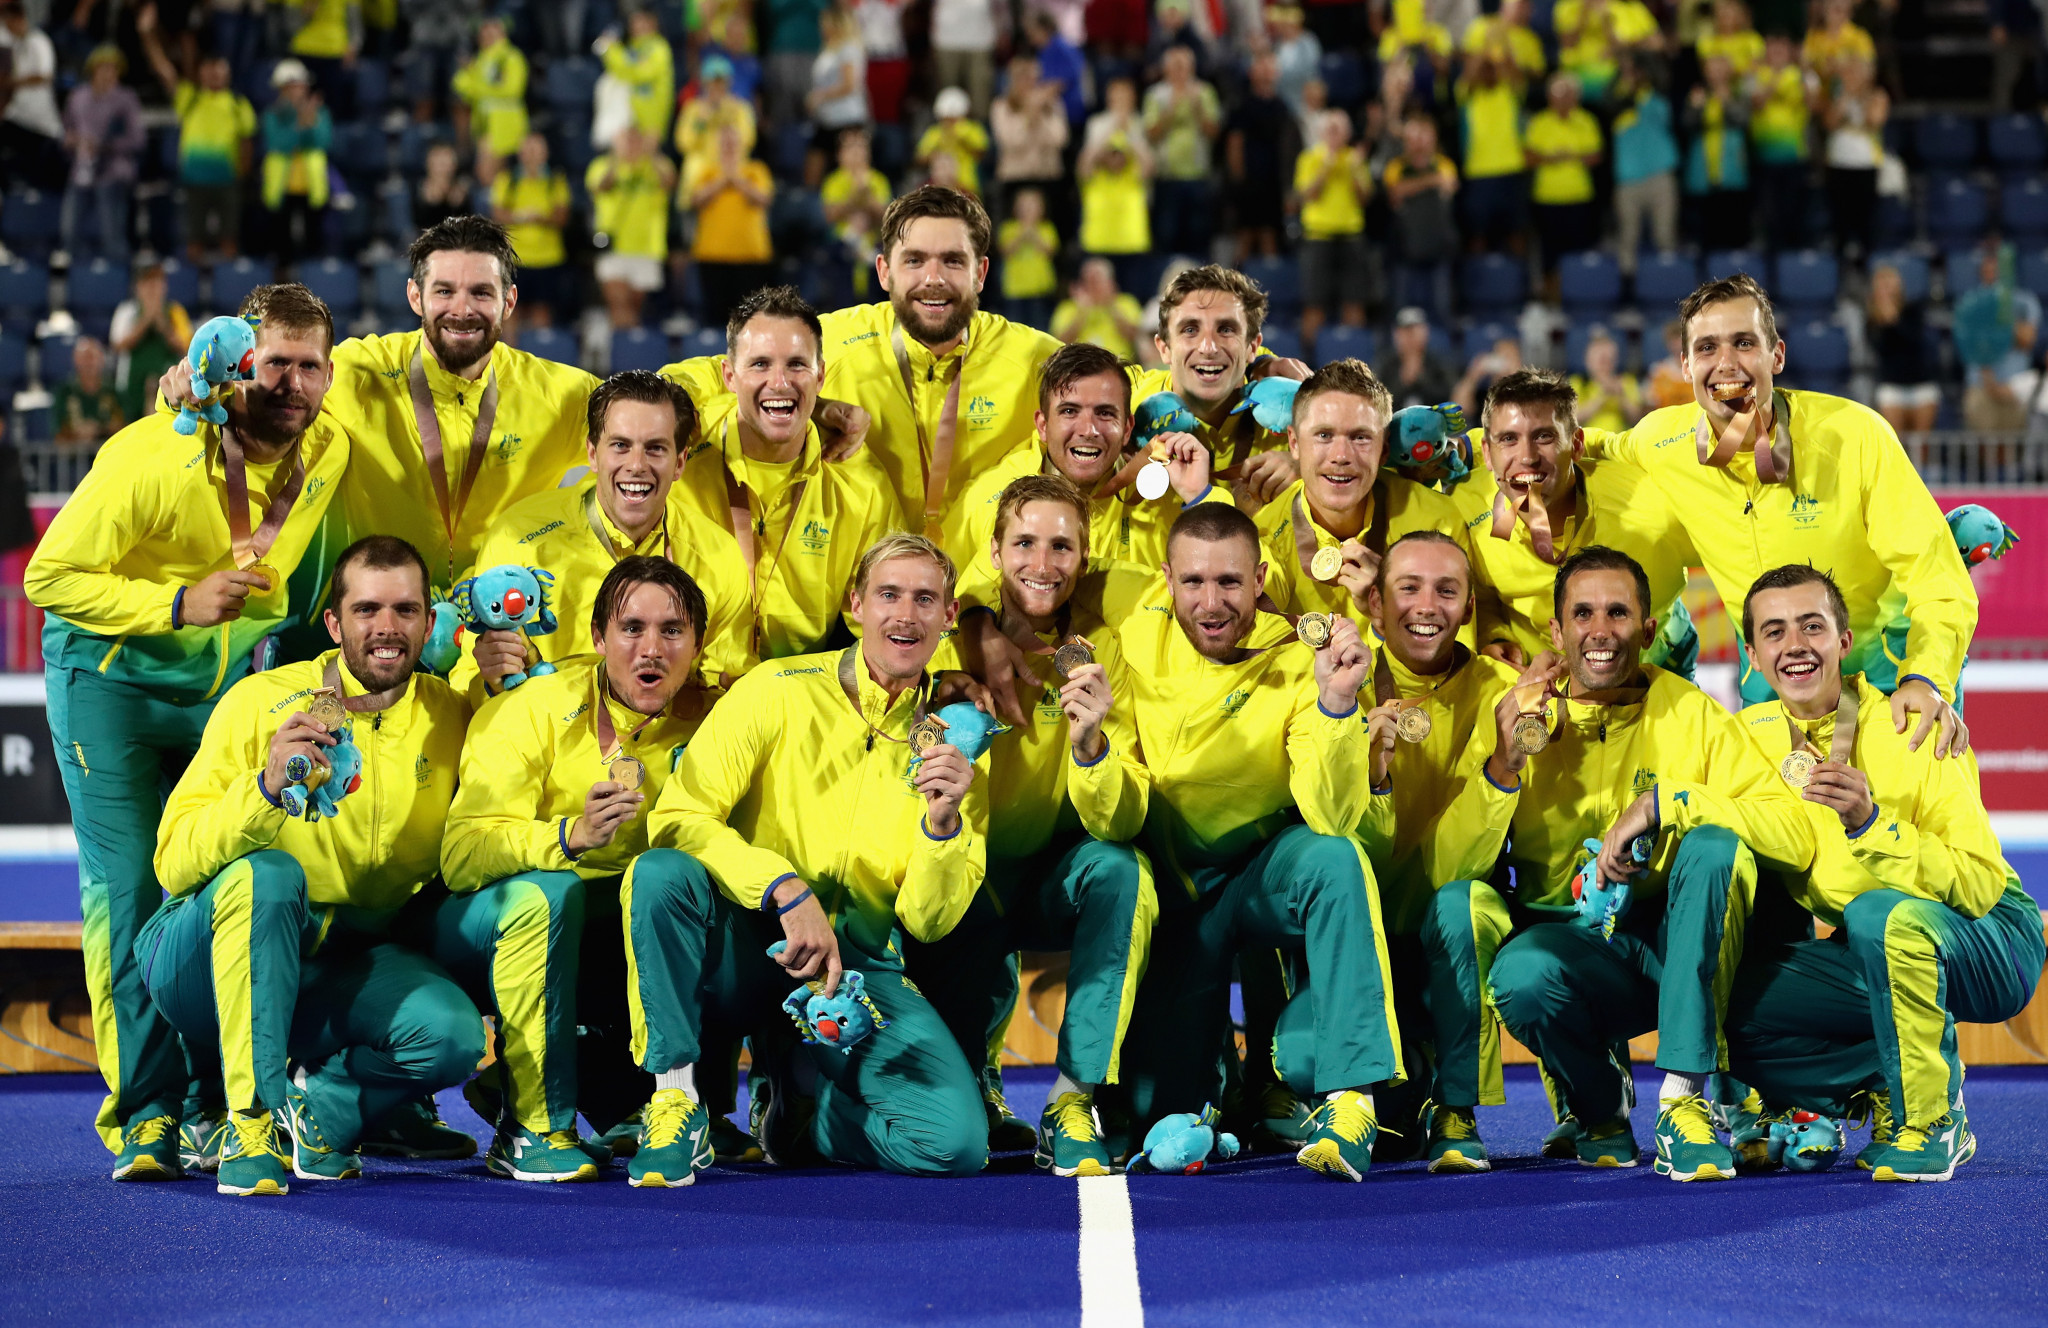 Australia's men's team won the Commonwealth Games gold medal for the sixth consecutive time and will be favourites again at Birmingham 2022 ©Getty Images